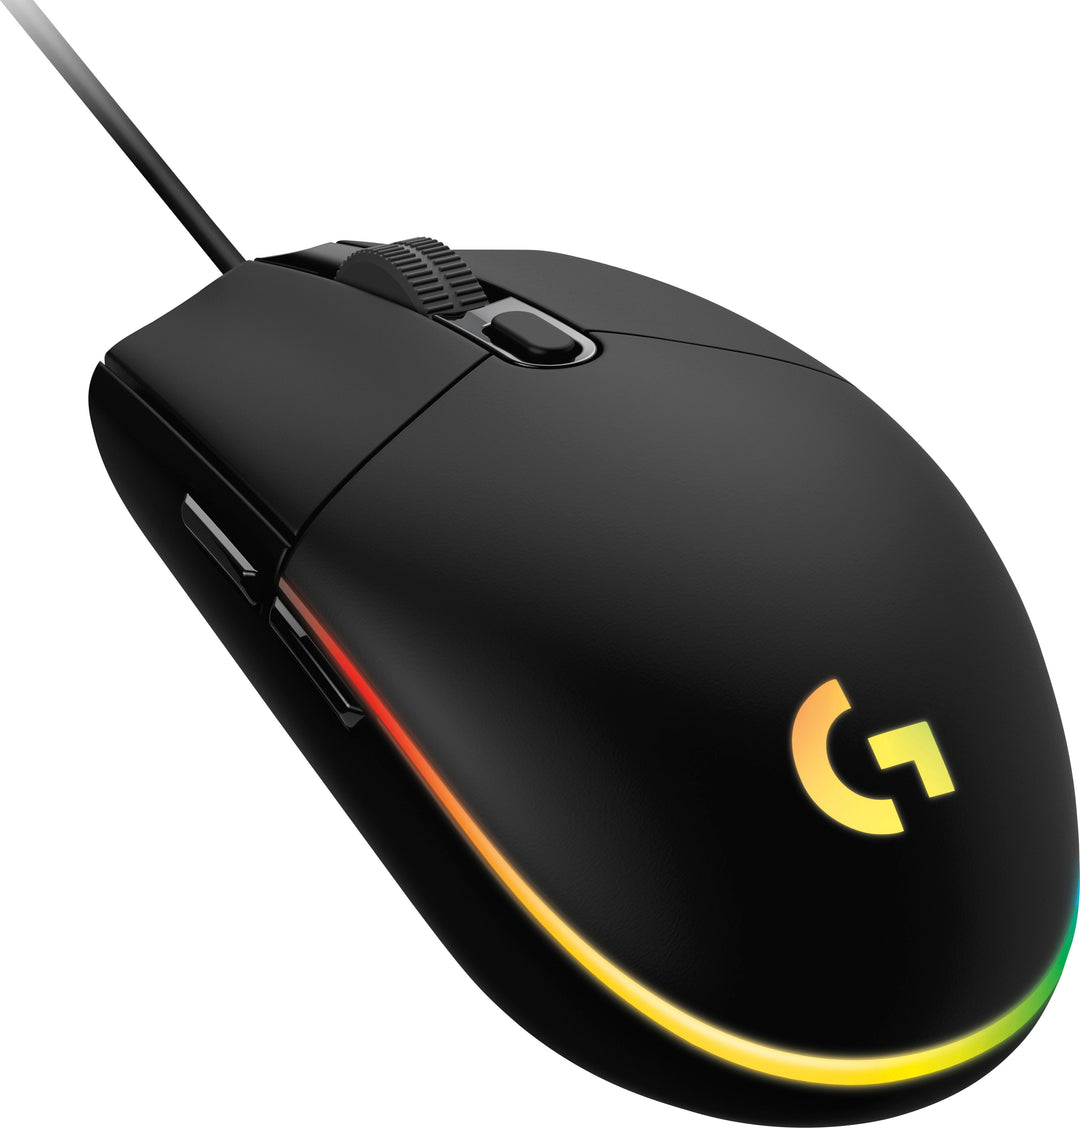 Logitech - G203 LIGHTSYNC Wired Optical Gaming Mouse with 8,000 DPI sensor - Black_0